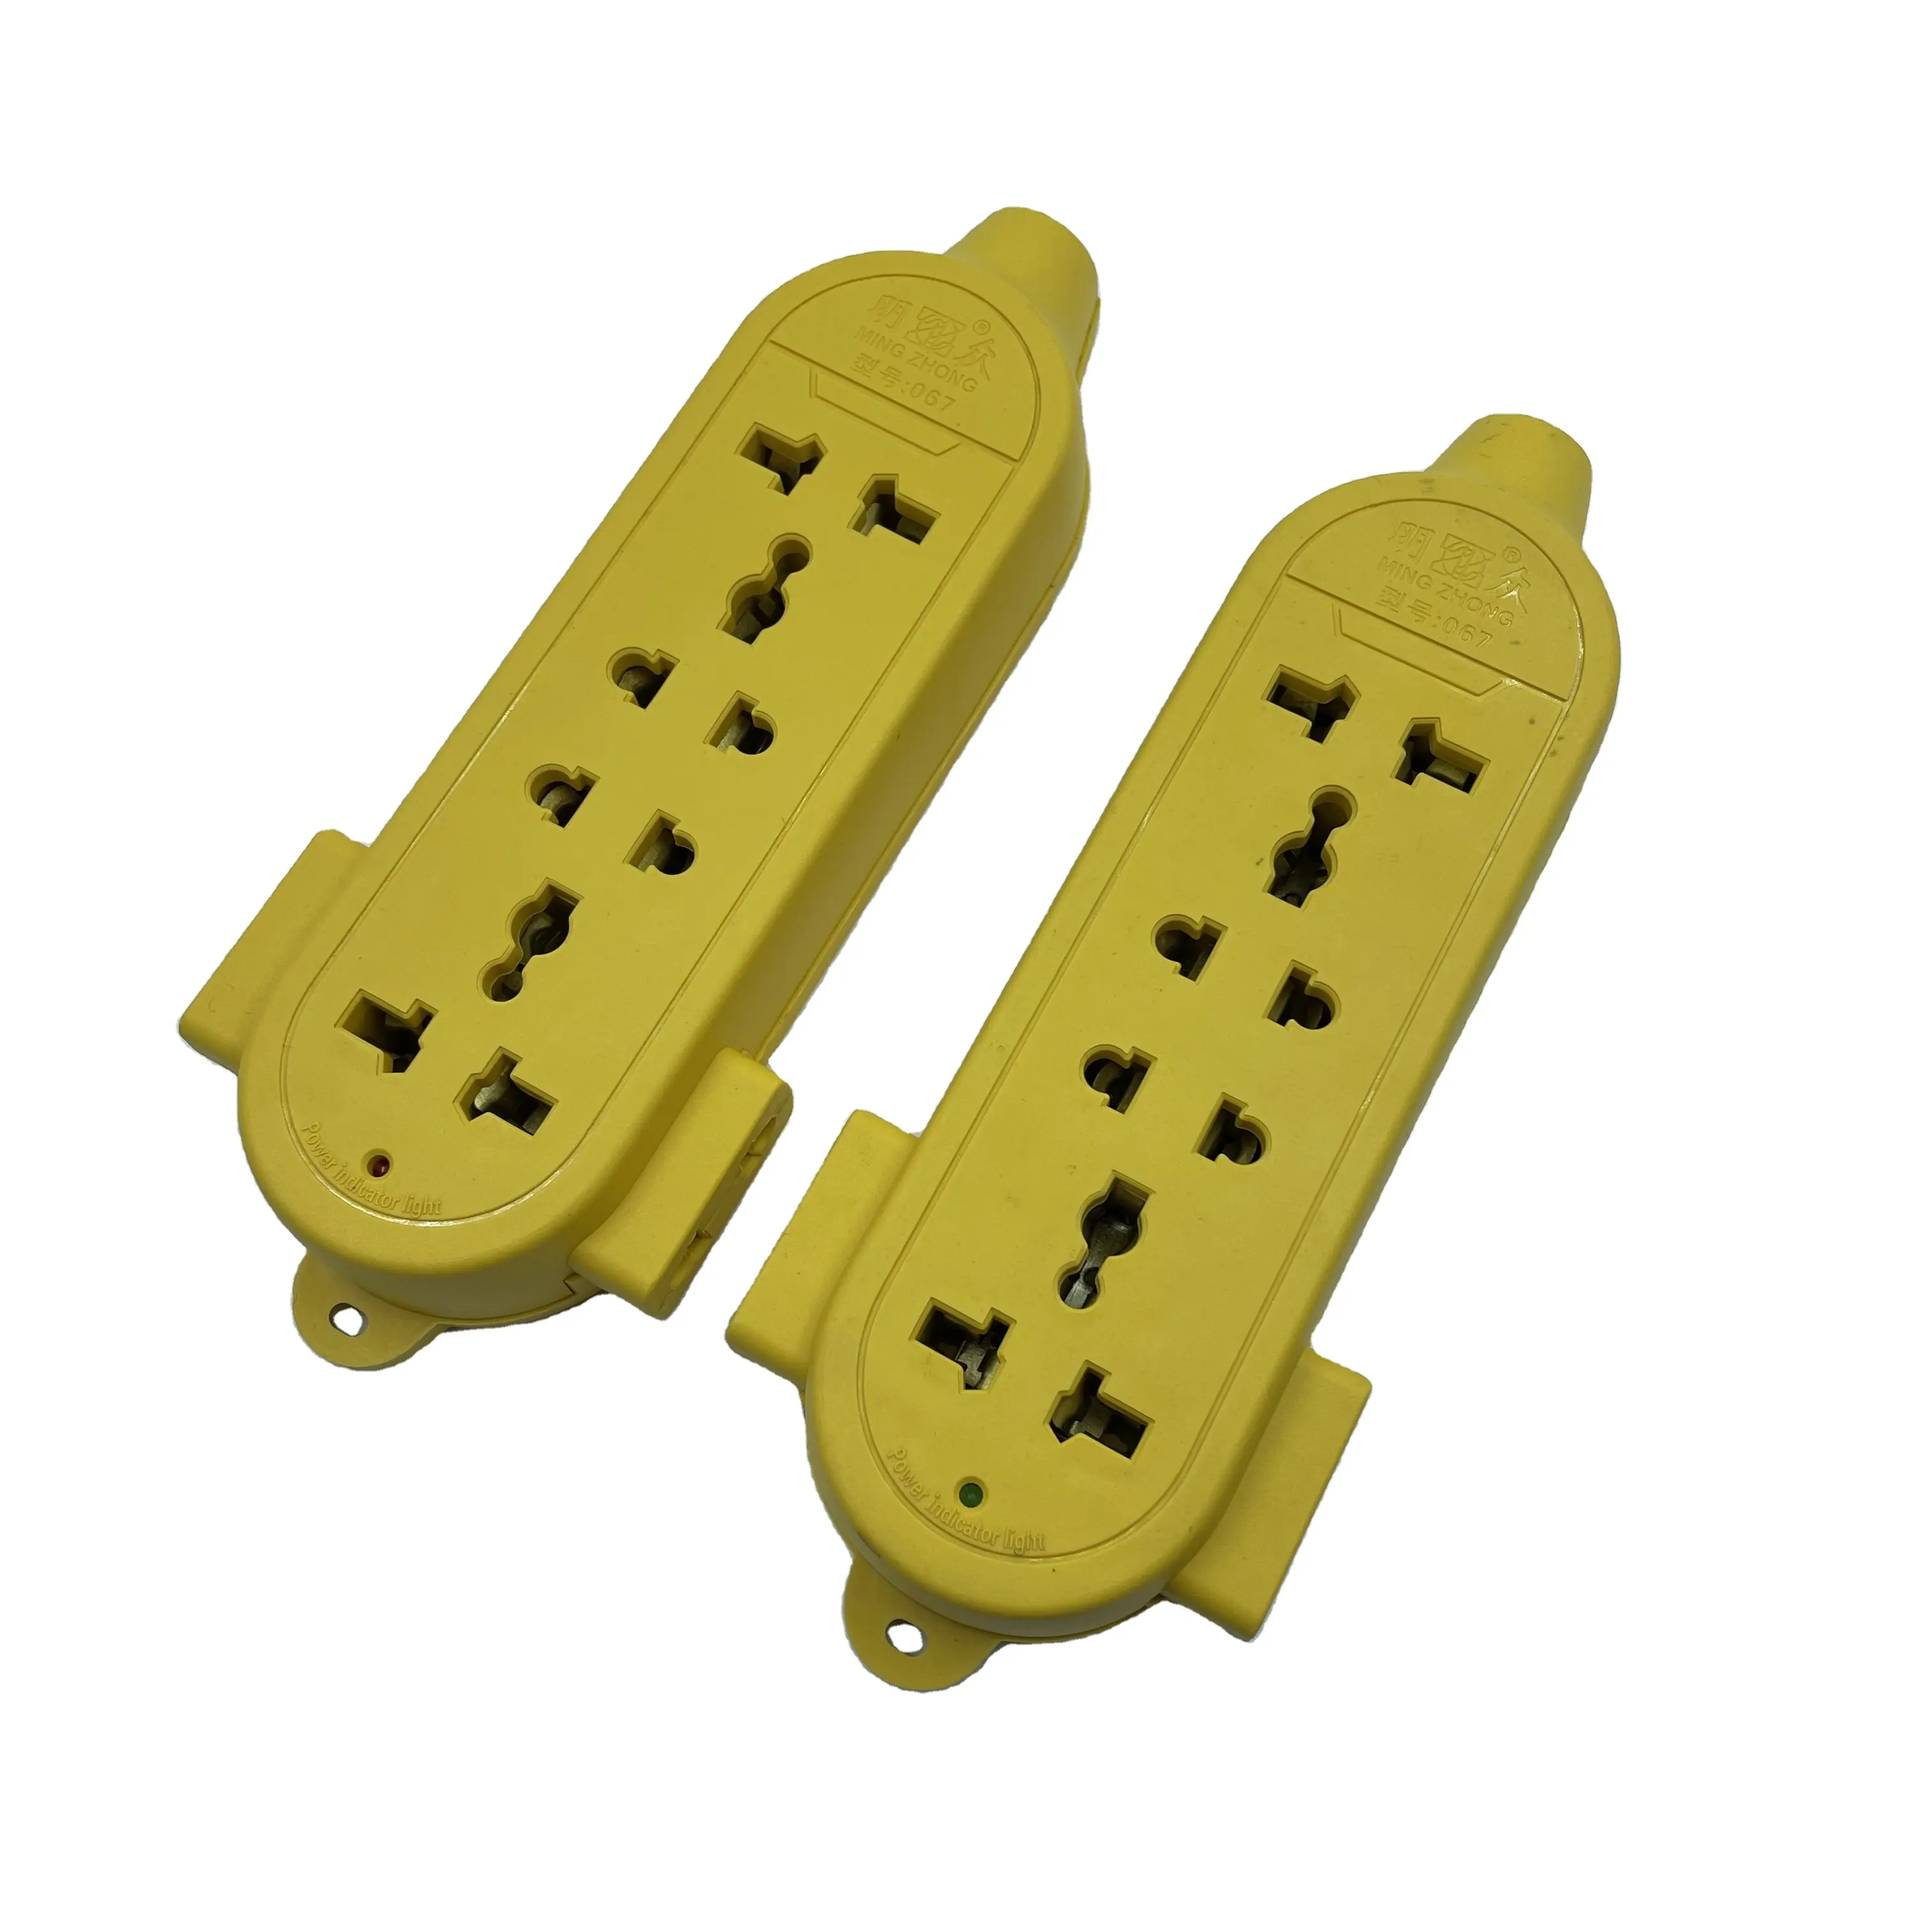 New style no wire universal hole yellow 10-hole socket pack separately